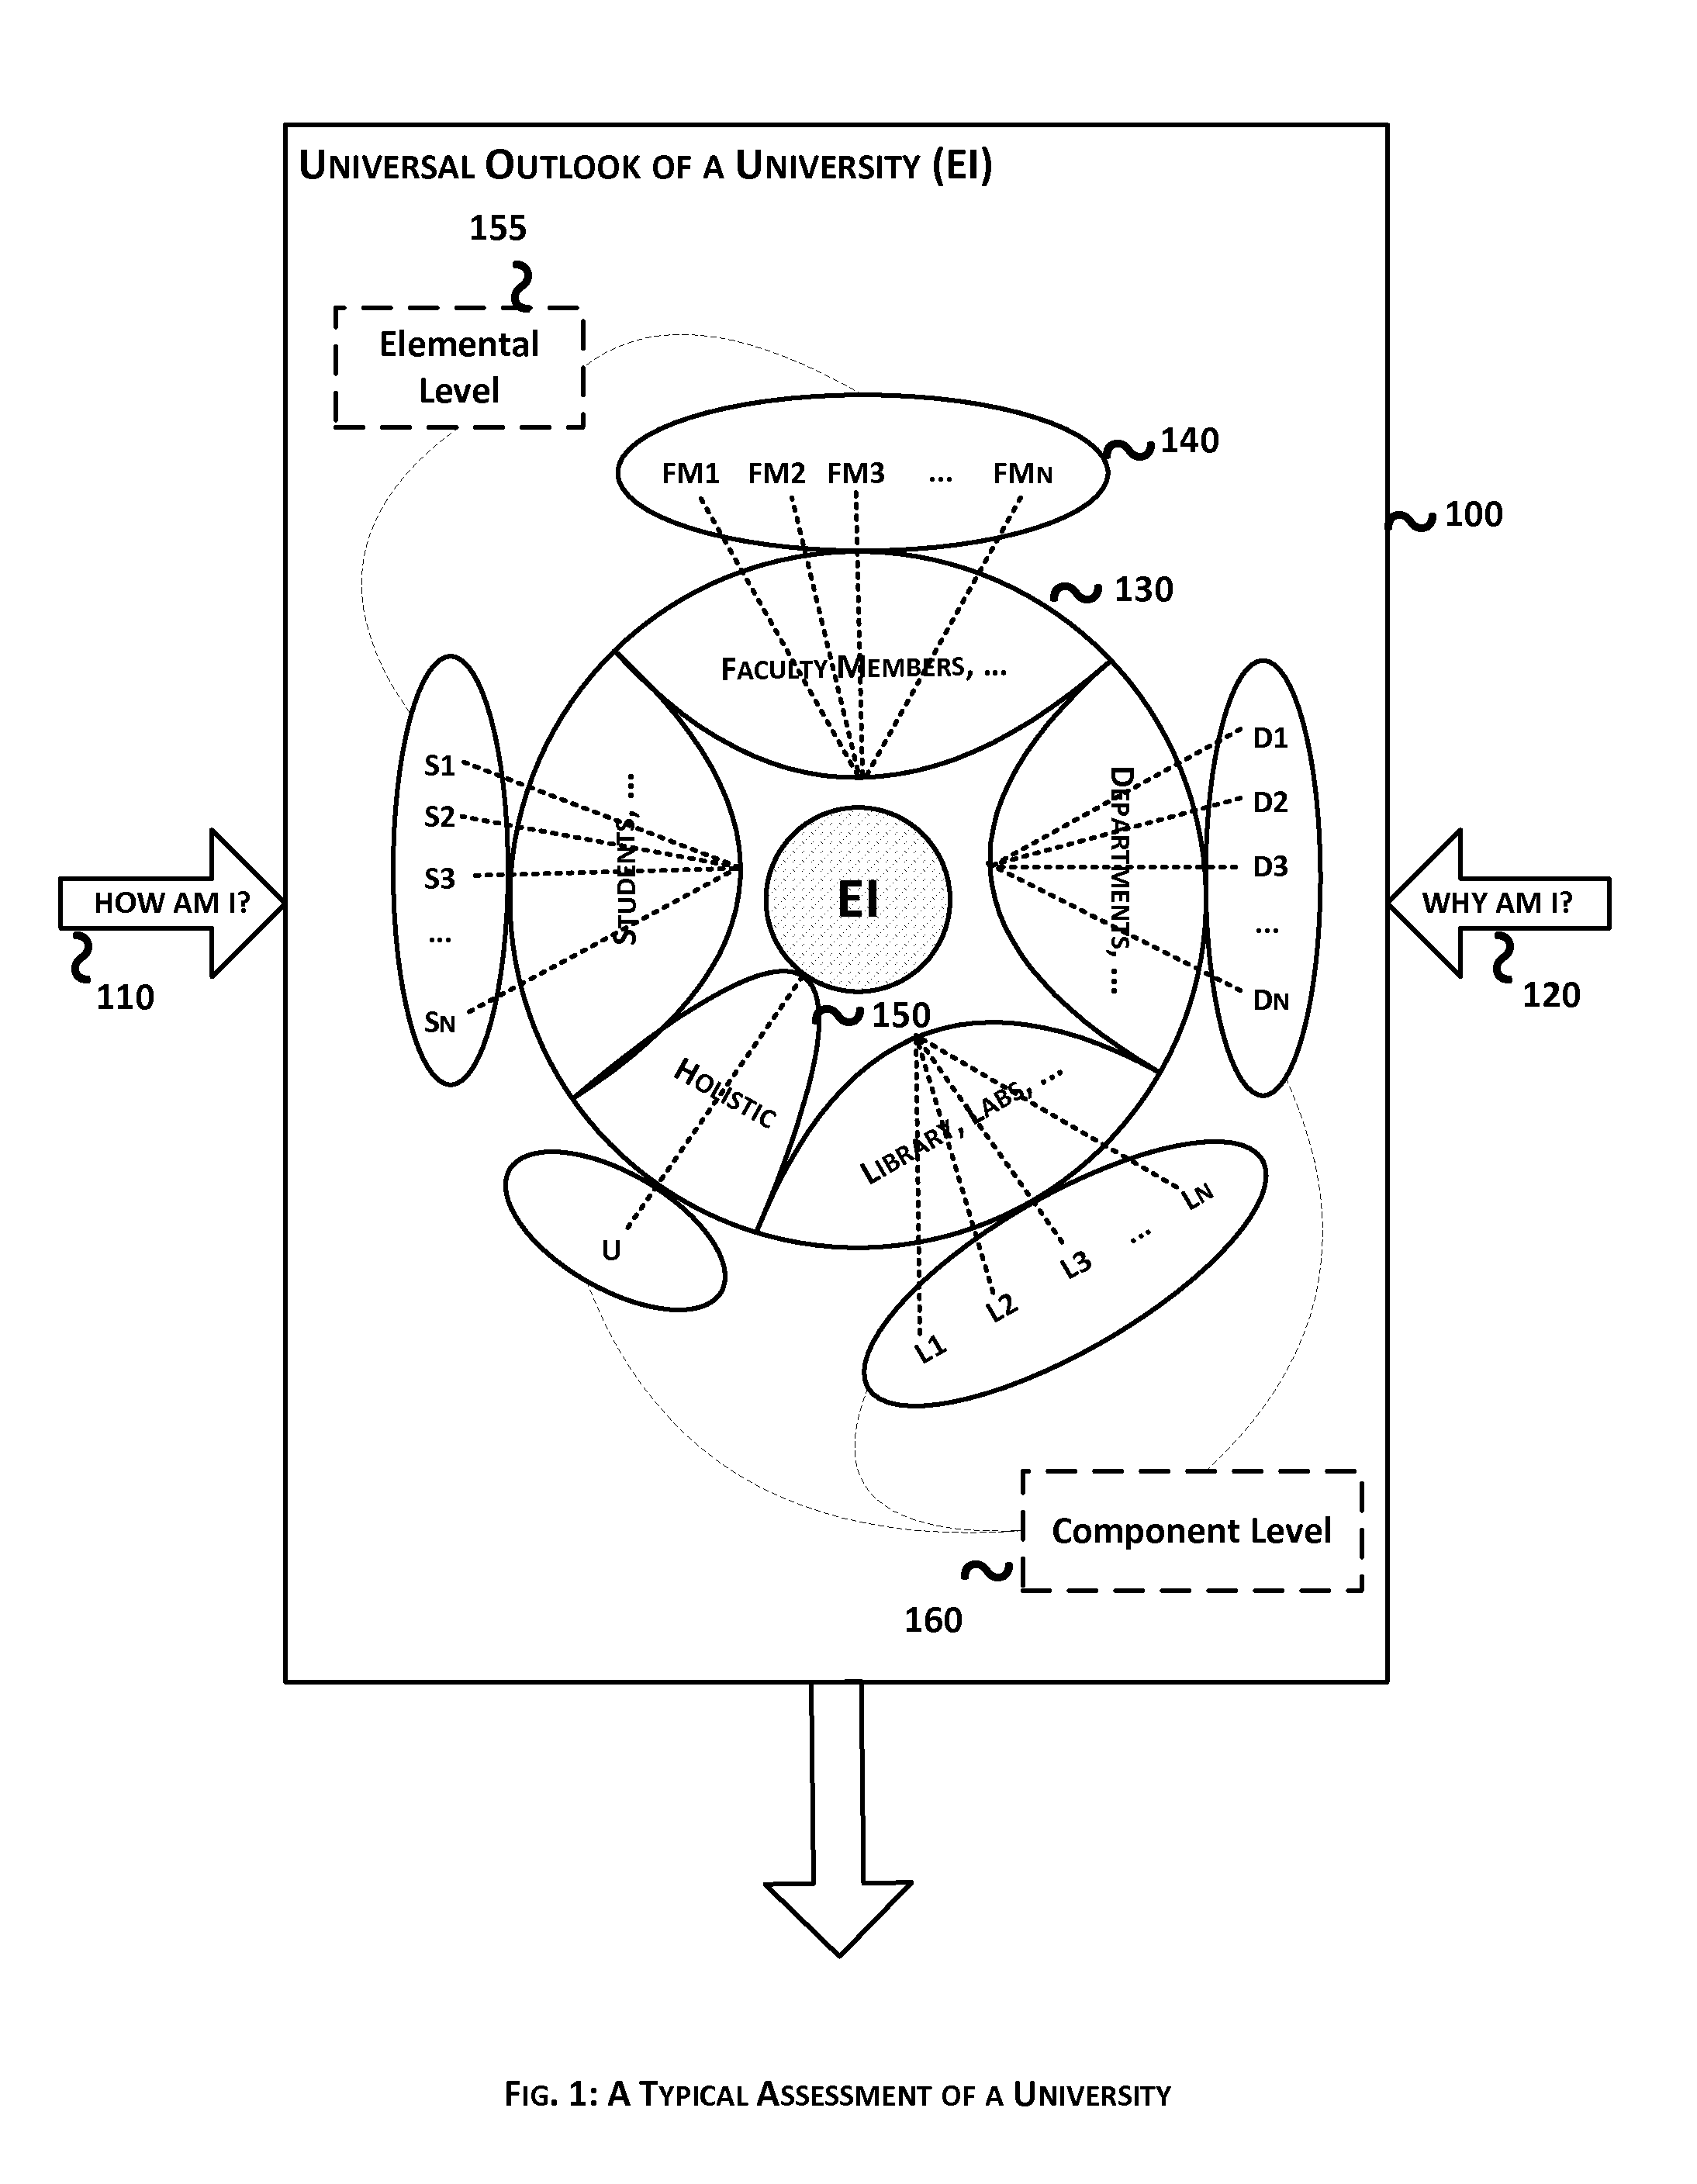 System and Method for Student Activity Gathering in a University